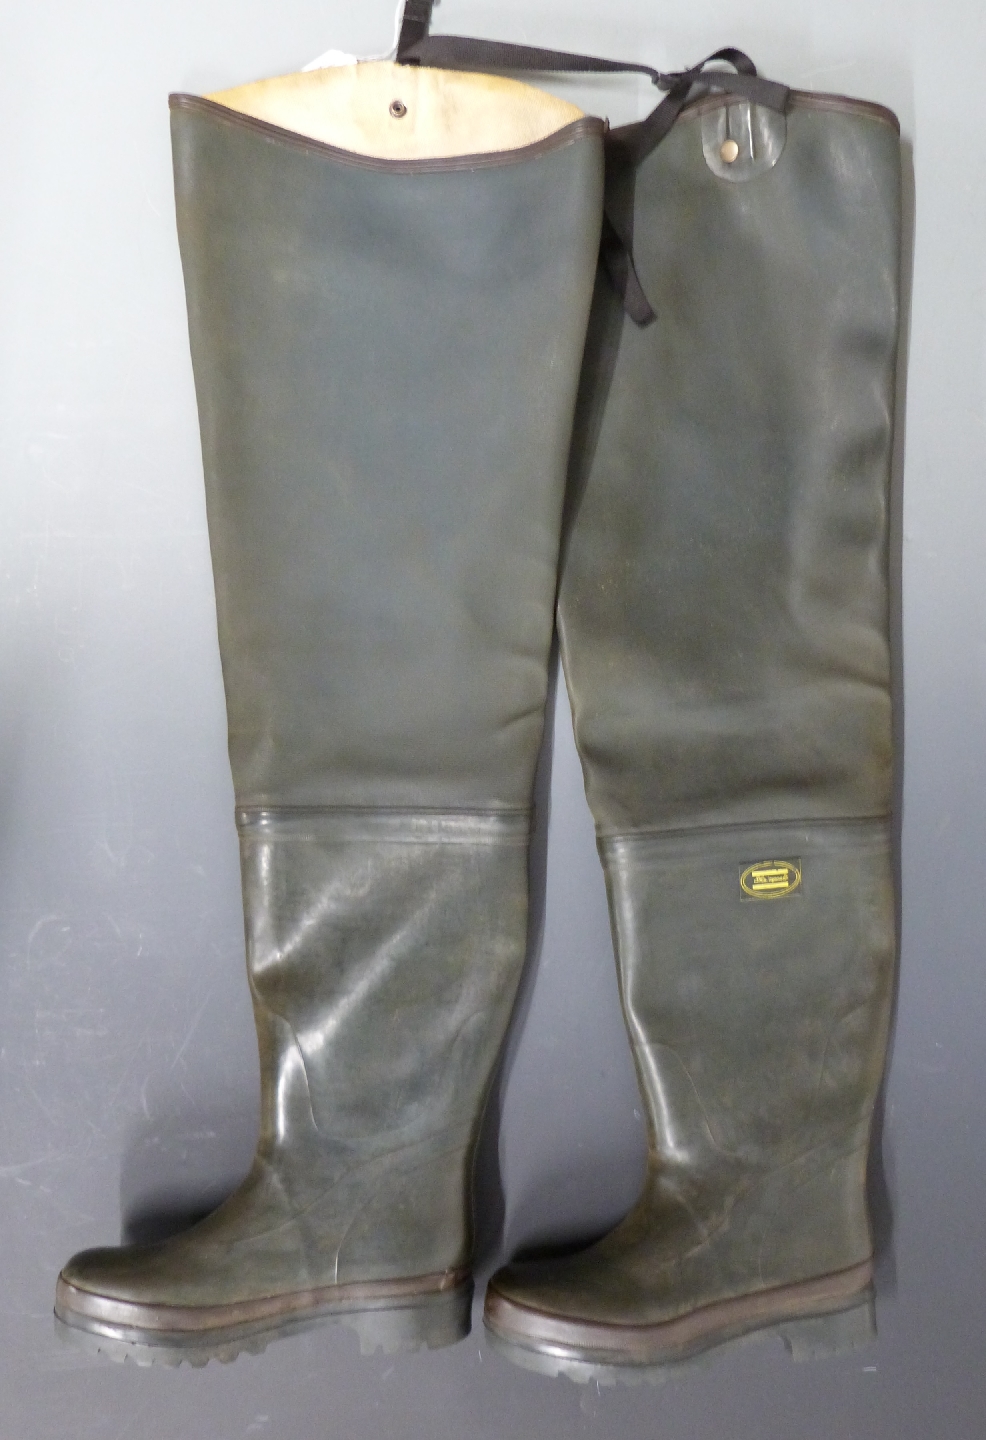 Shakespeare waders, size 9 (43).